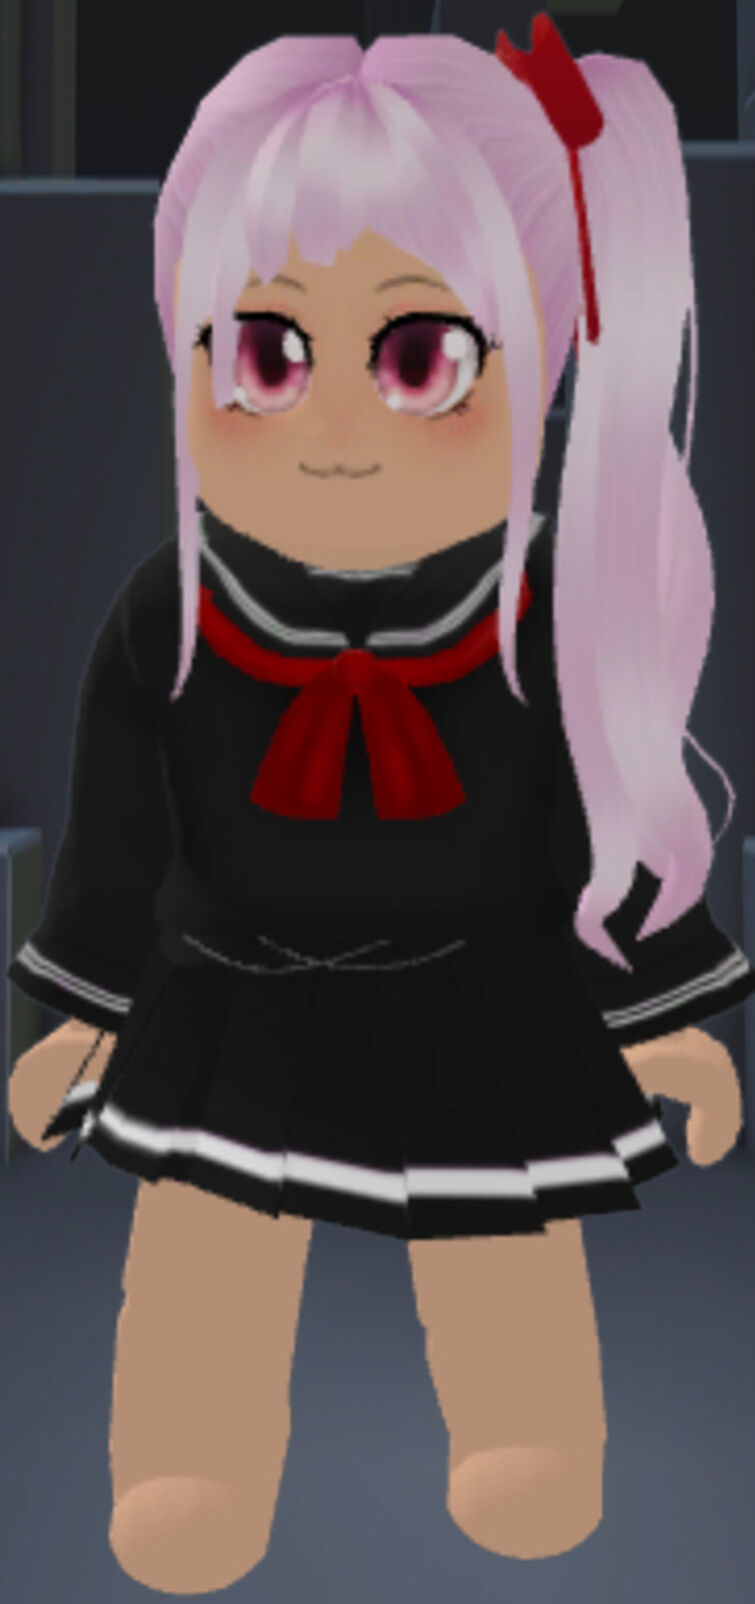 i made this in catalog avatar creator. does it look good? : r/RobloxAvatars